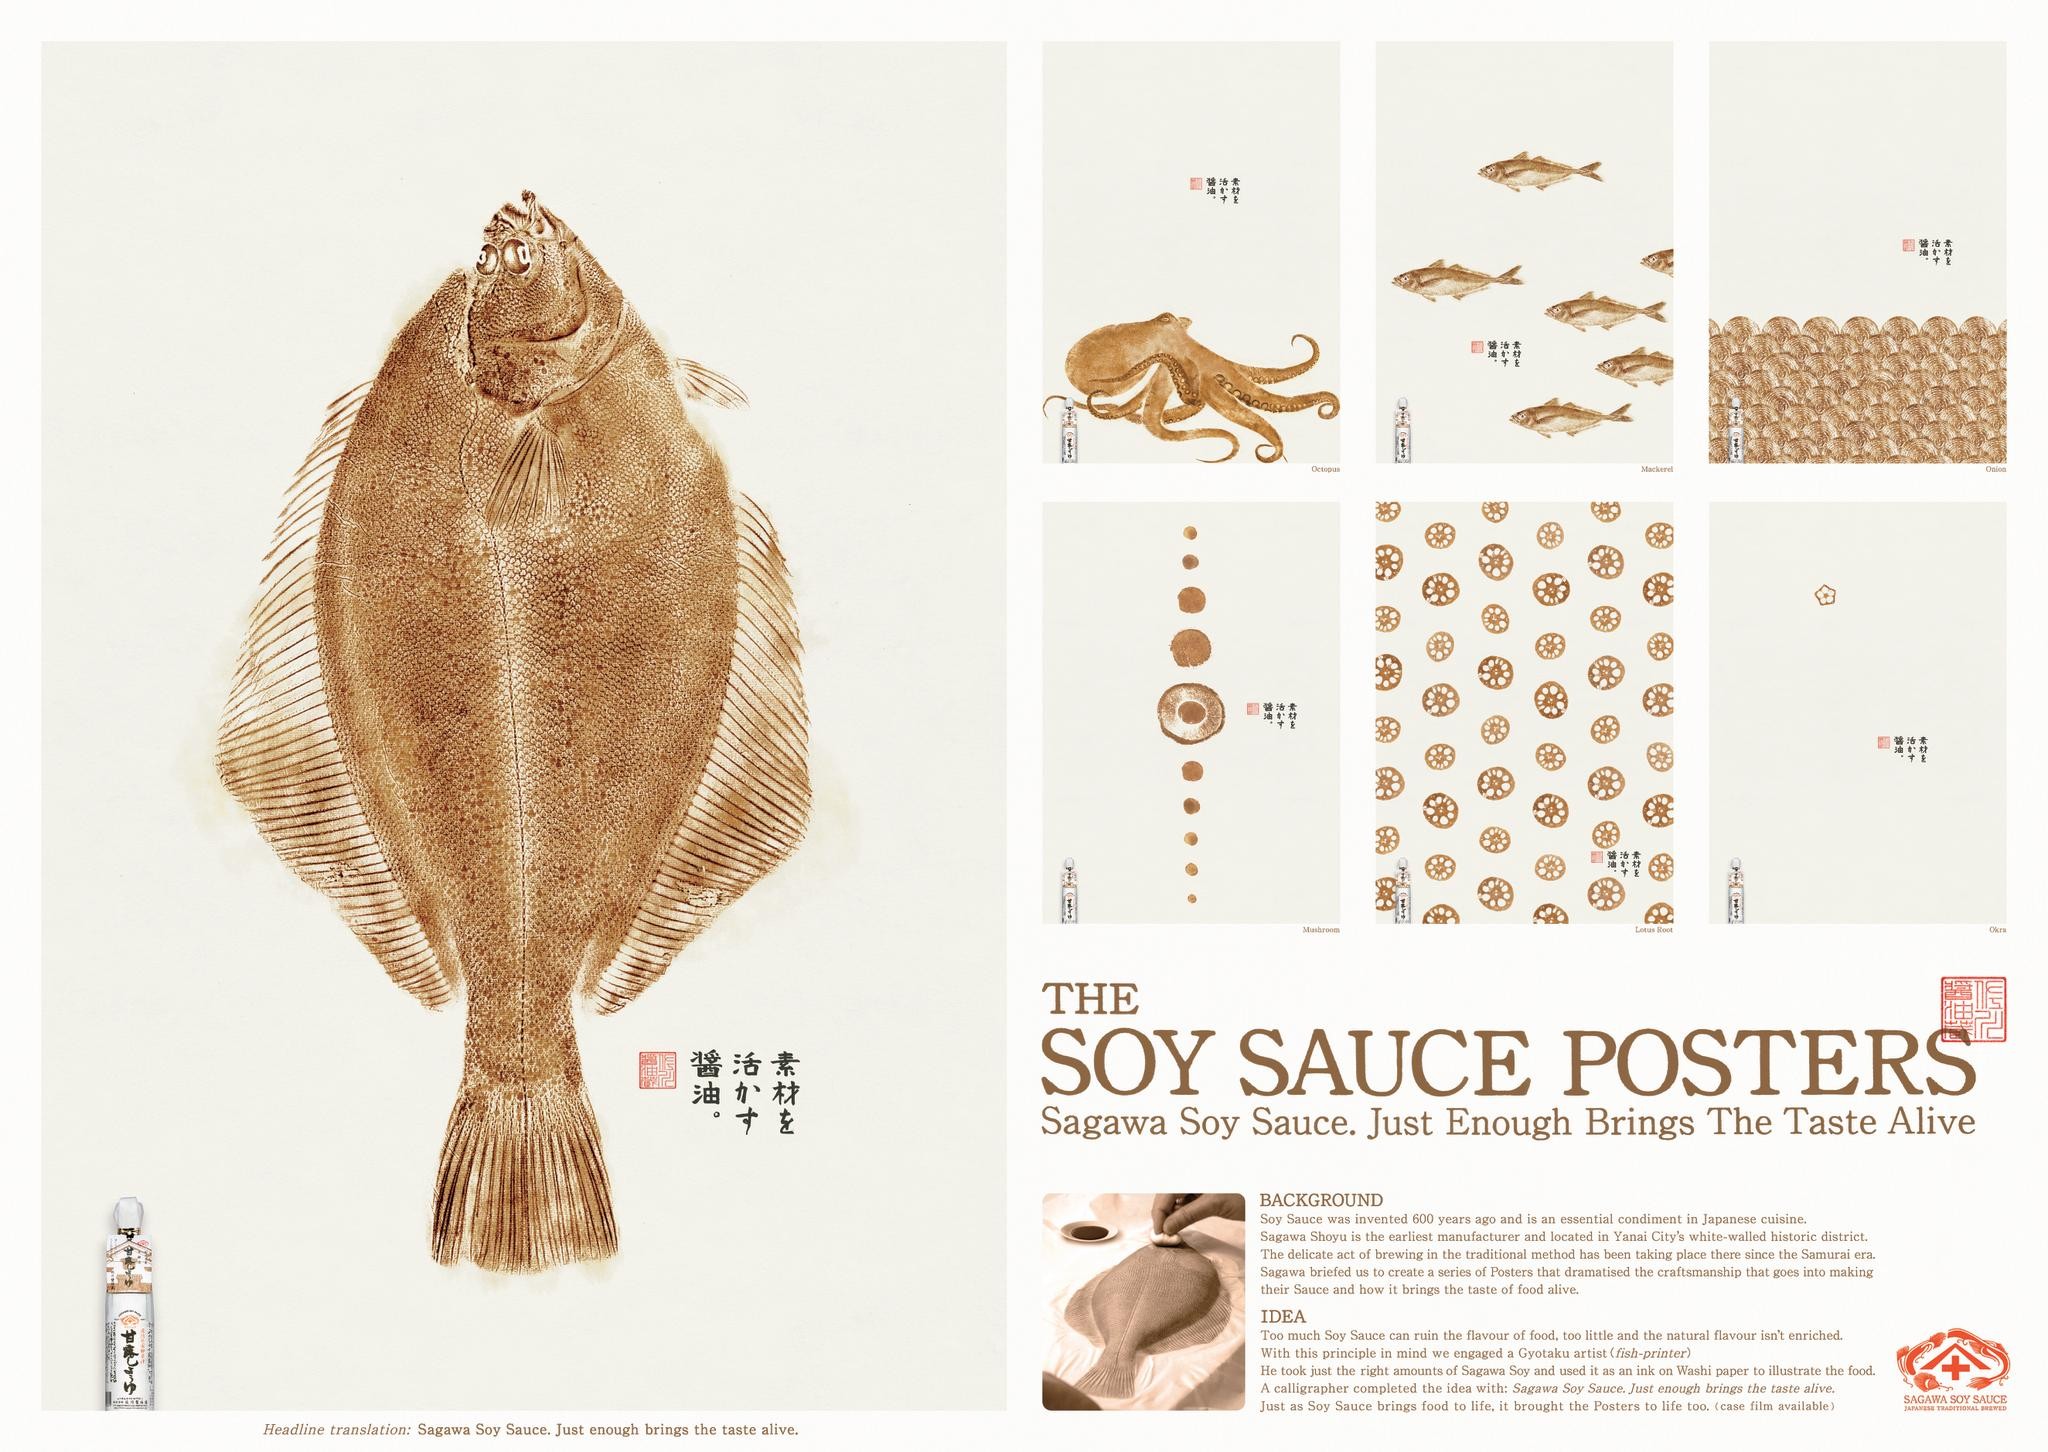 The Soy Sauce Poster